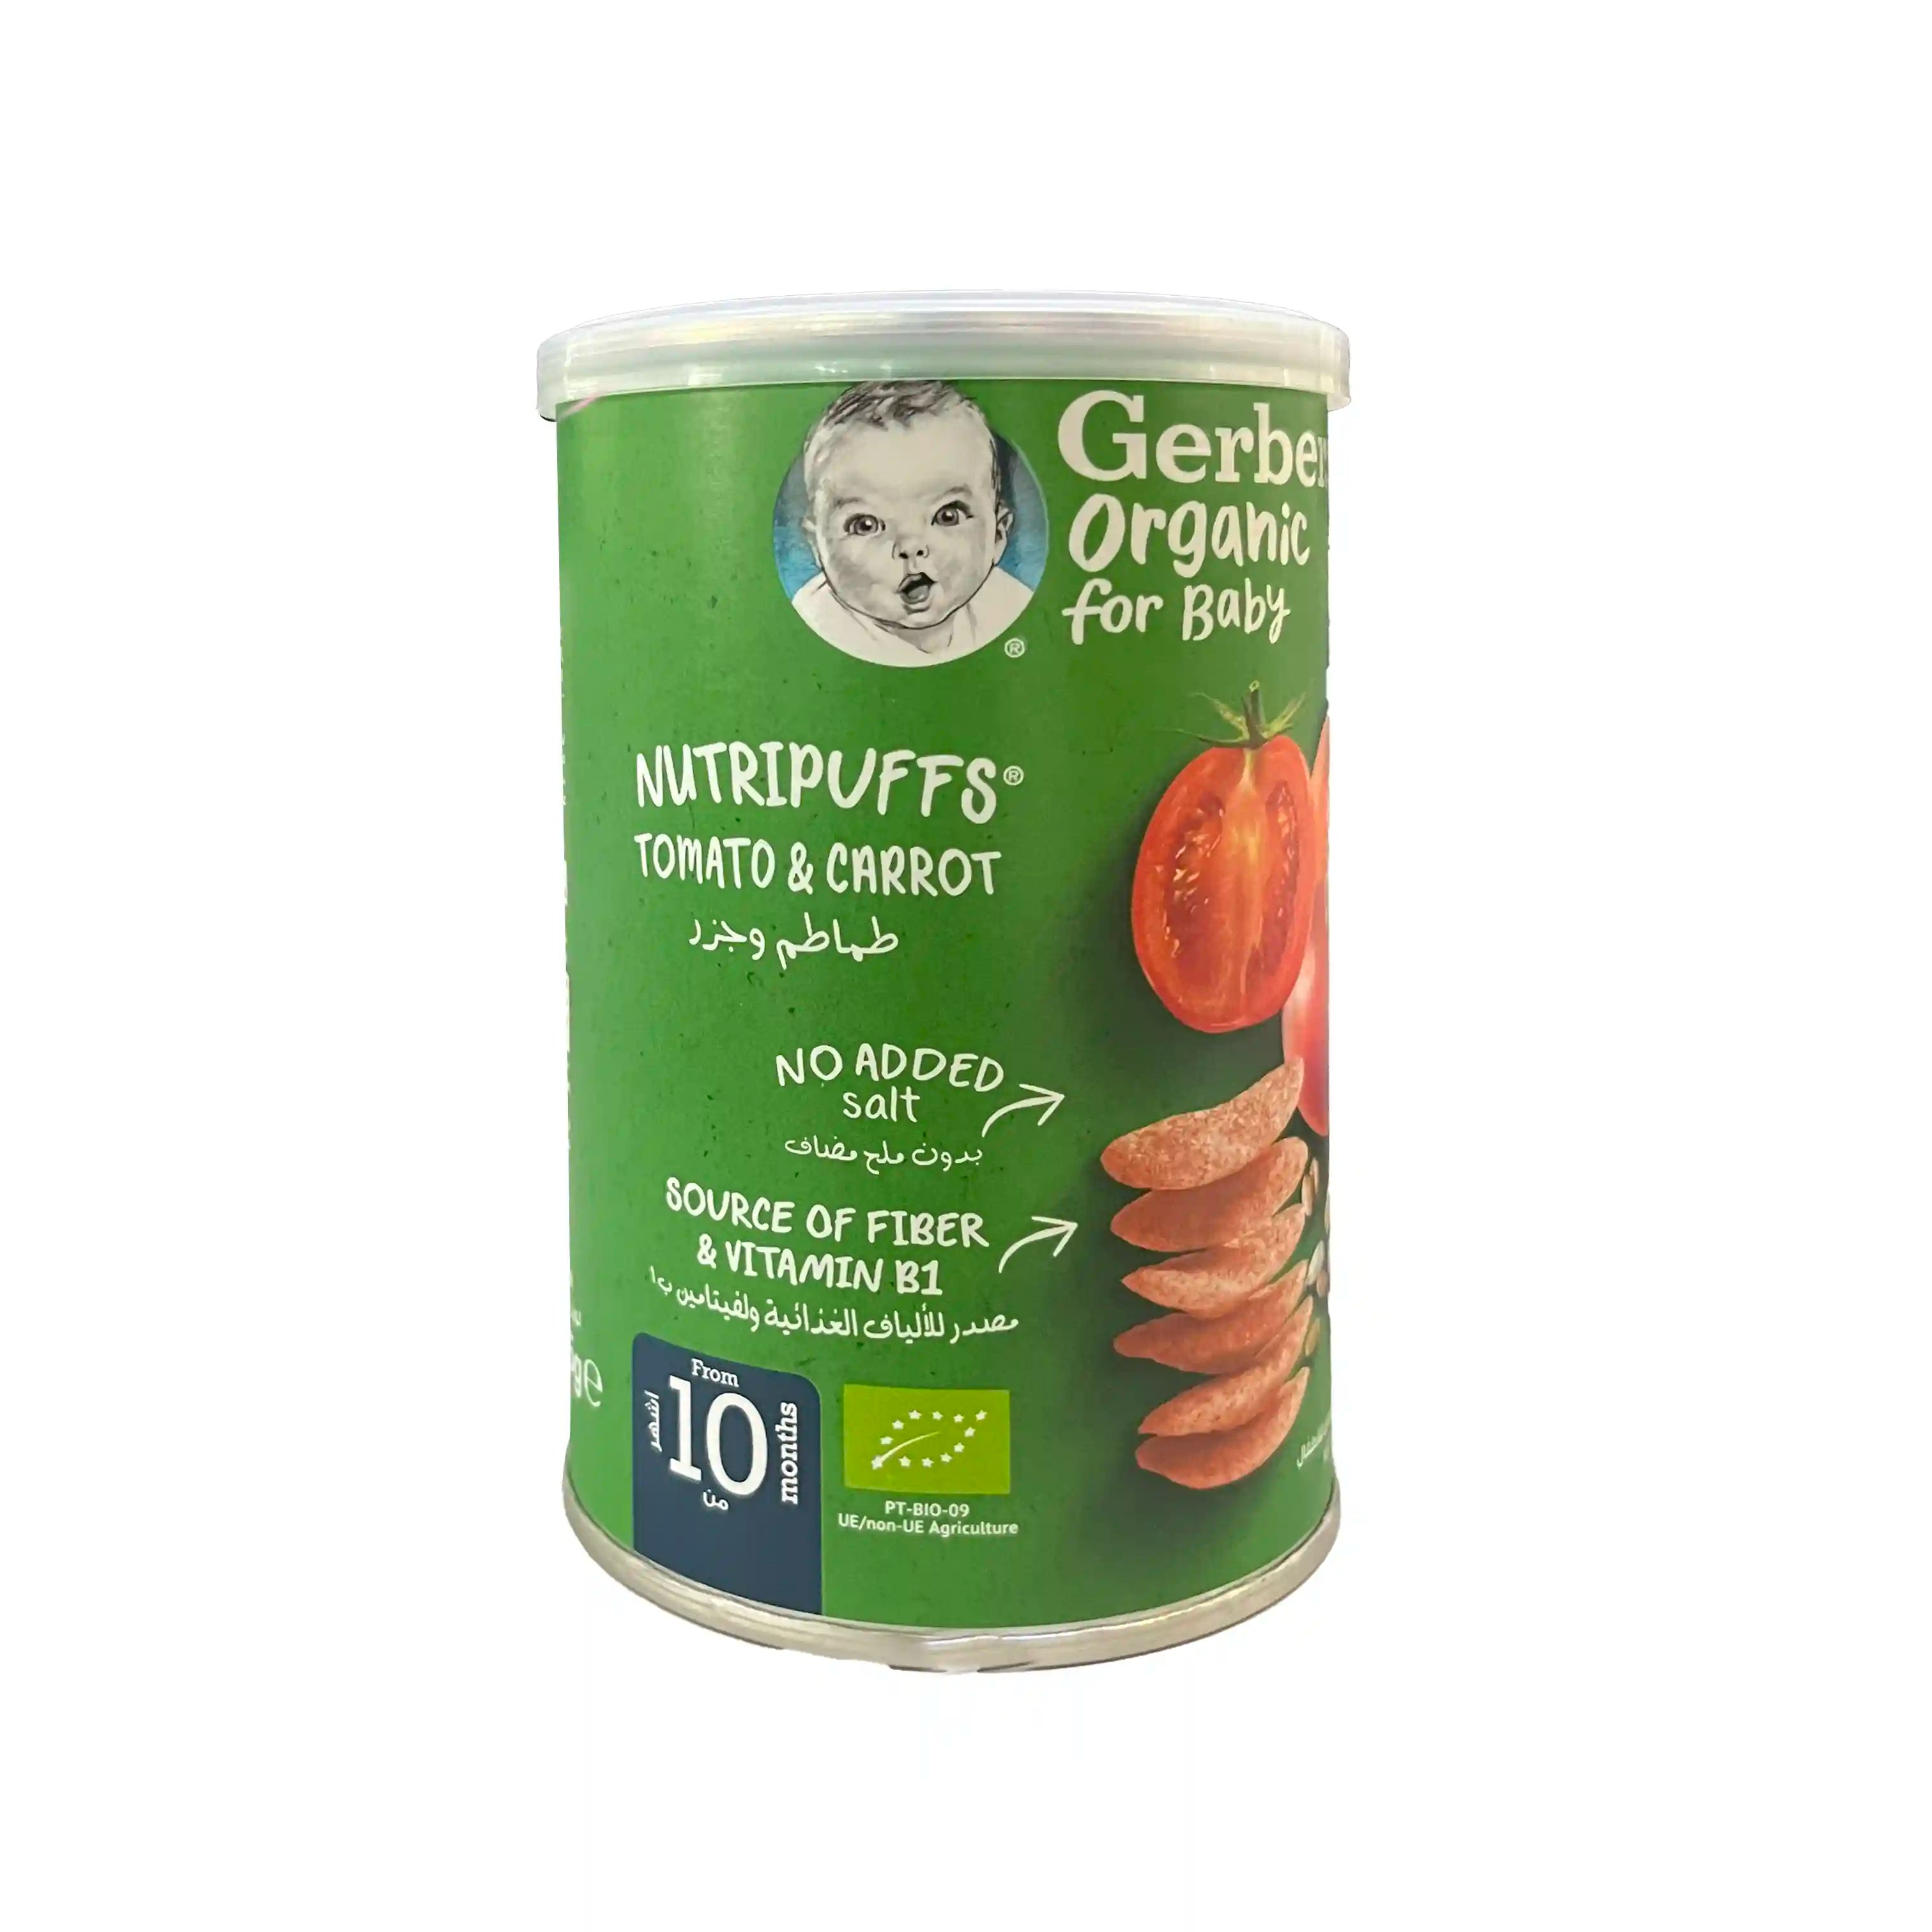 Gerber Organic Nutripuffs with Tomato & Carrot for Small Babies - 35gms, 10+months